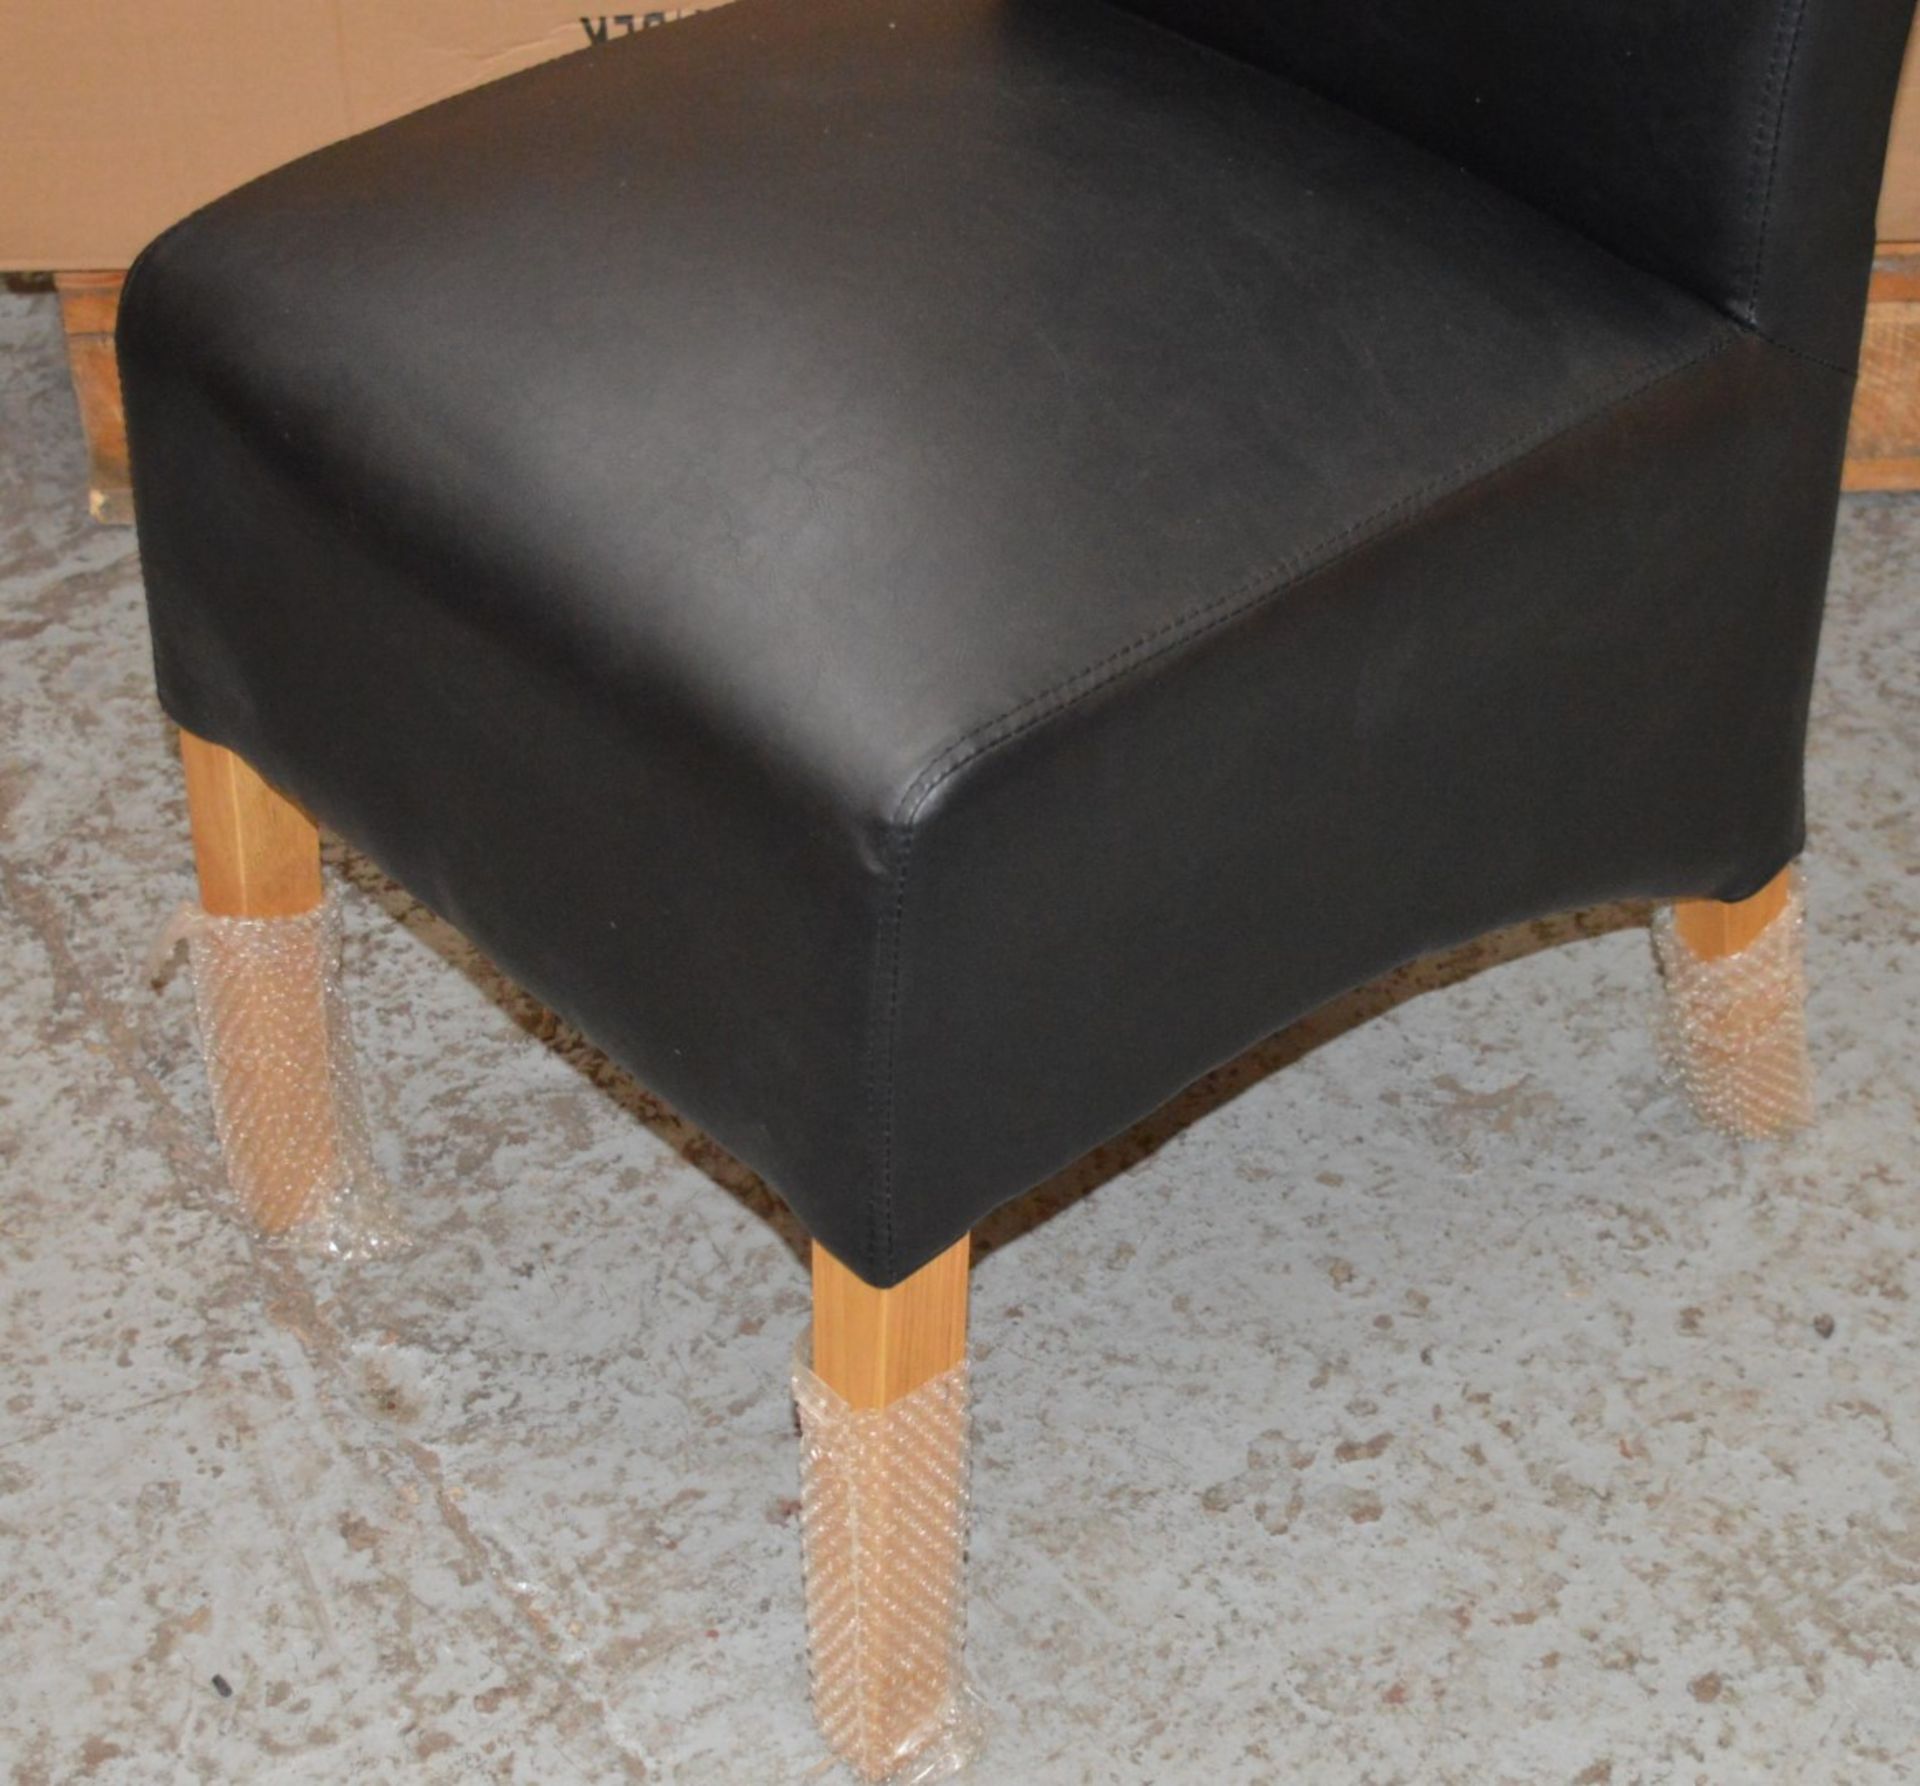 4 x Black Faux Leather Dining Chairs - Seating Dimensions: W44 x D60 x Height 106cm, Seat Height 47c - Image 3 of 7